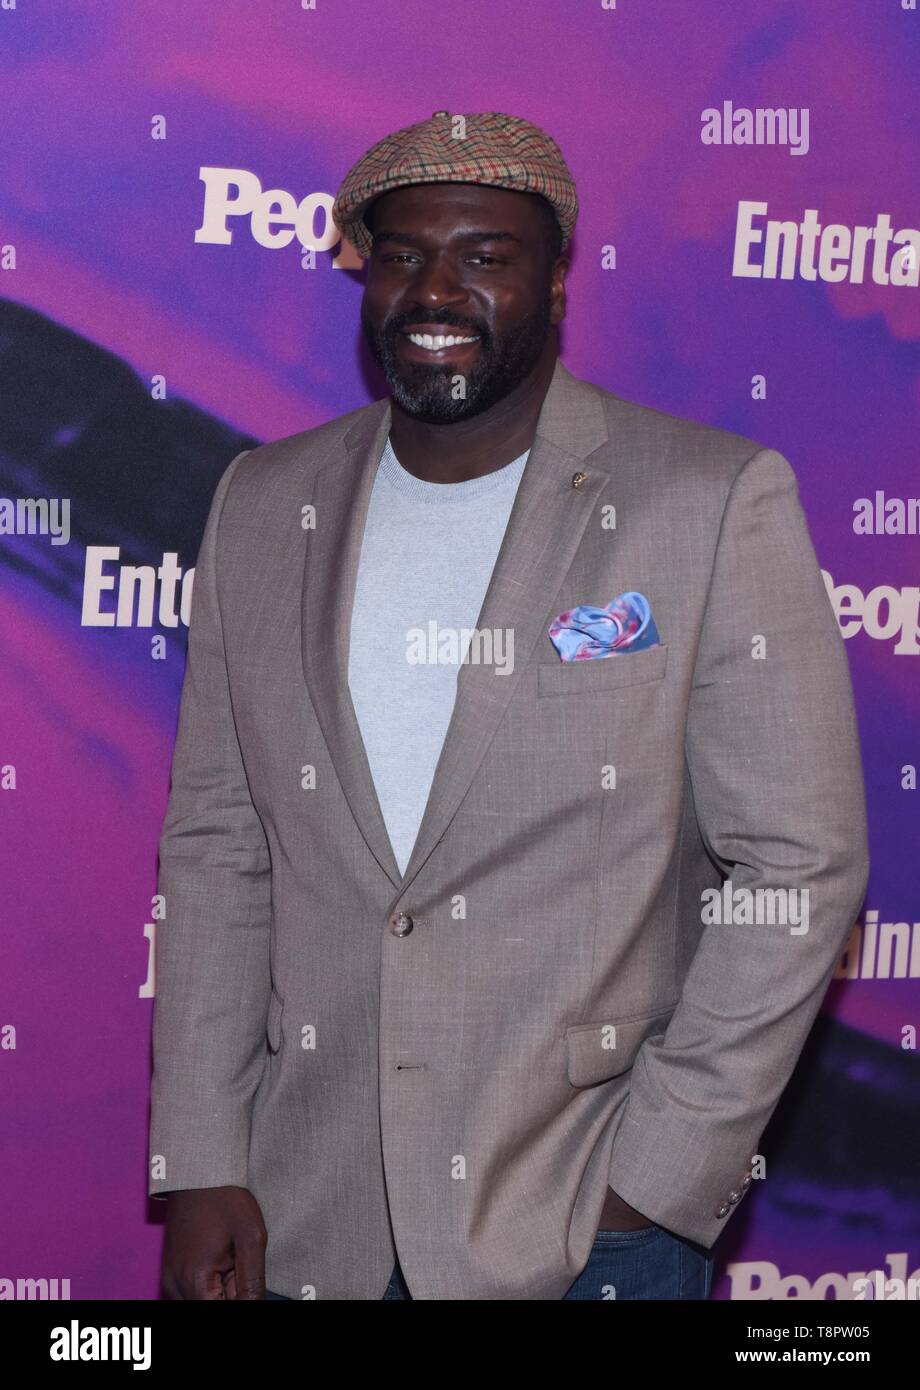 NEW YORK, NEW YORK - 13. Mai: Stephen Hill besucht die Menschen & Entertainment Weekly 2019 Upfronts am Union Park am 13. Mai 2019 in New York City. Foto: Jeremy Smith/imageSPACE/MediaPunch Stockfoto